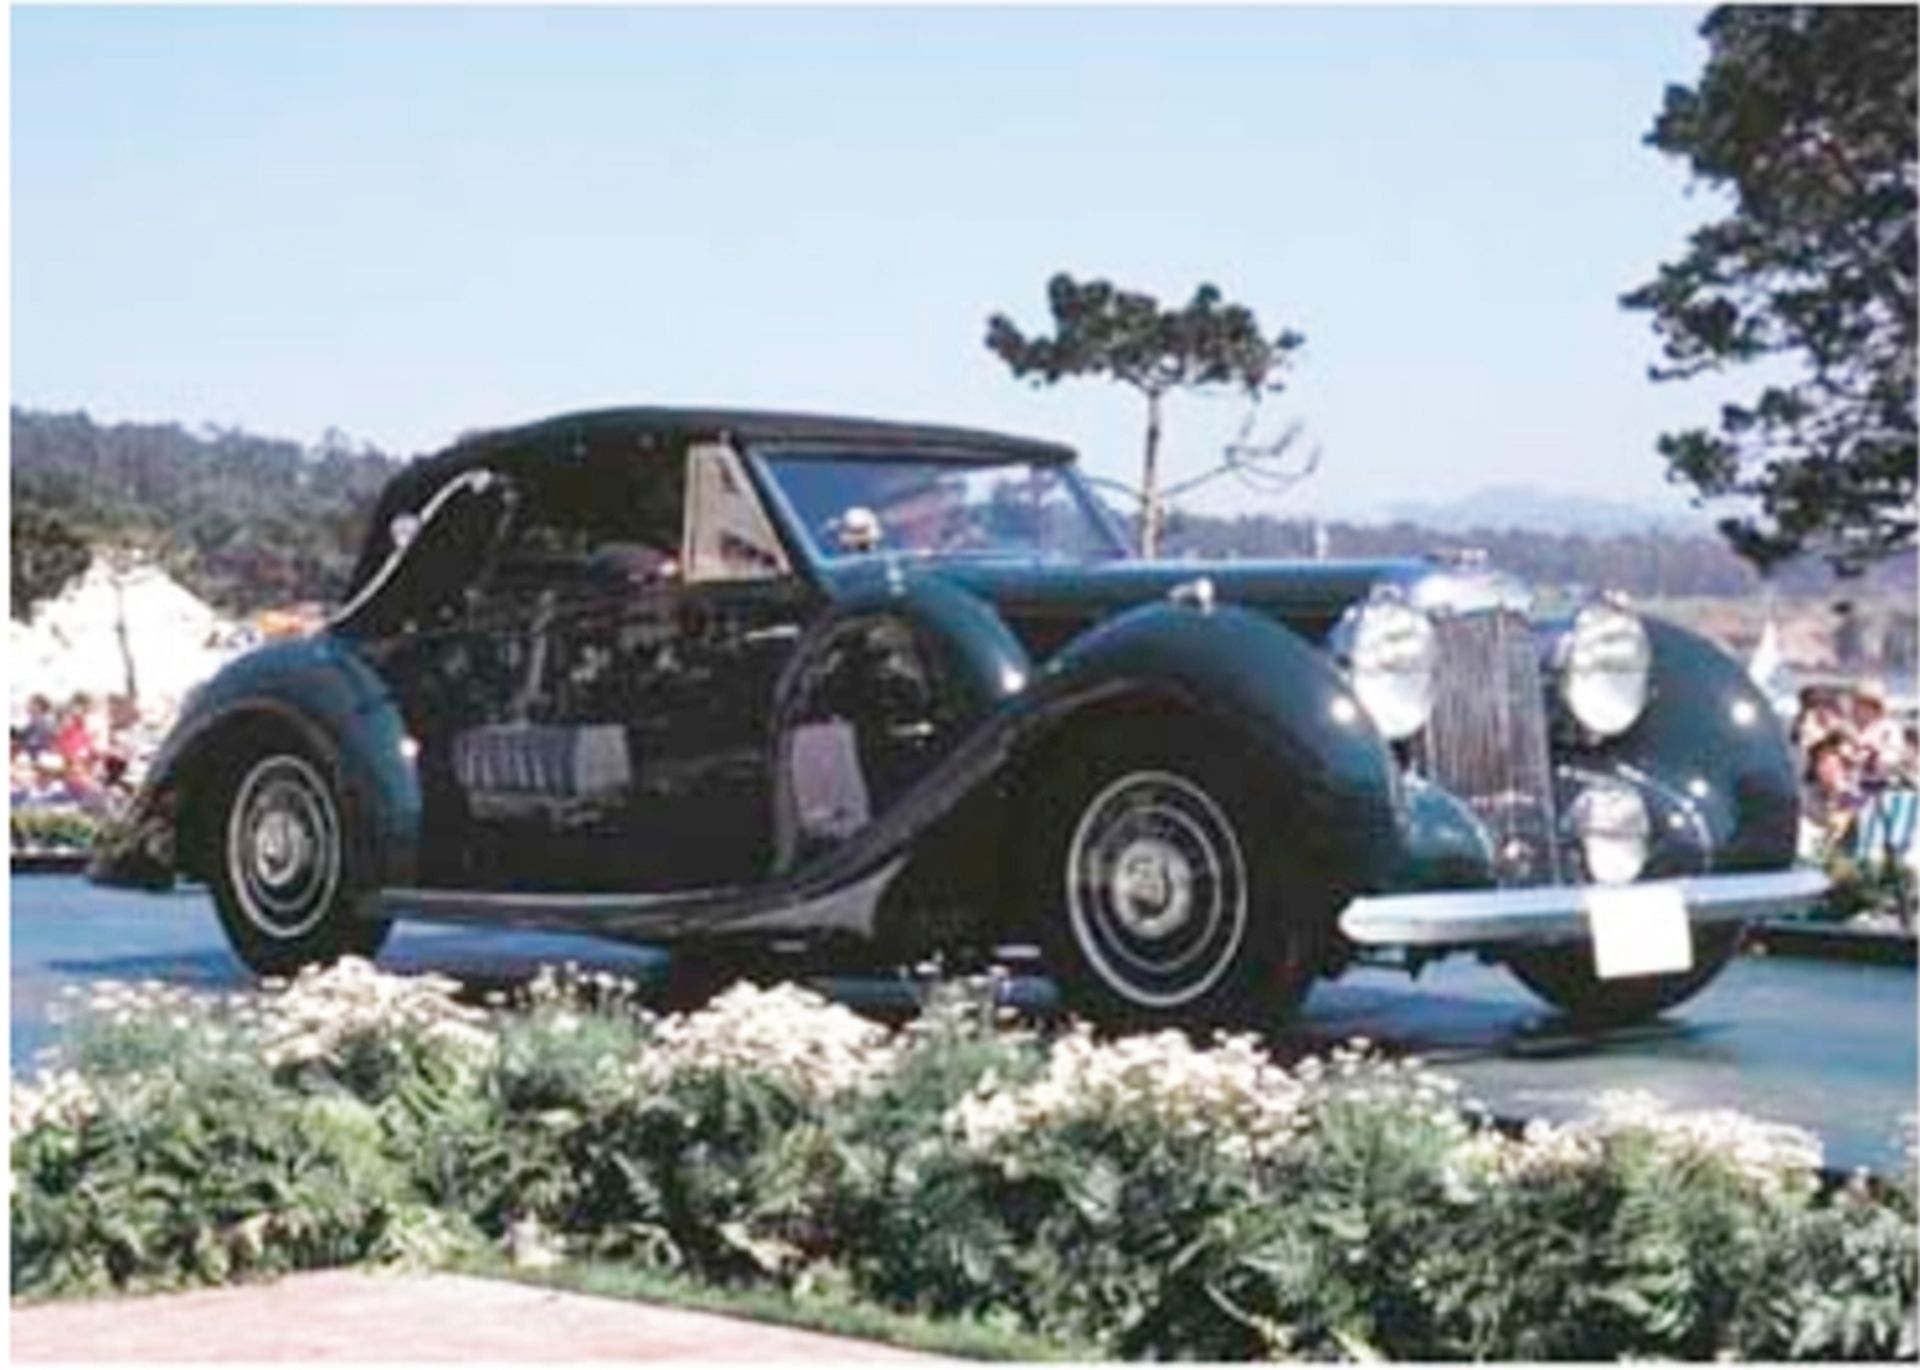 Offered from the estate of the late Michael Patrick Aiken, MBE,1939 Lagonda V12 Drophead Coupé C...